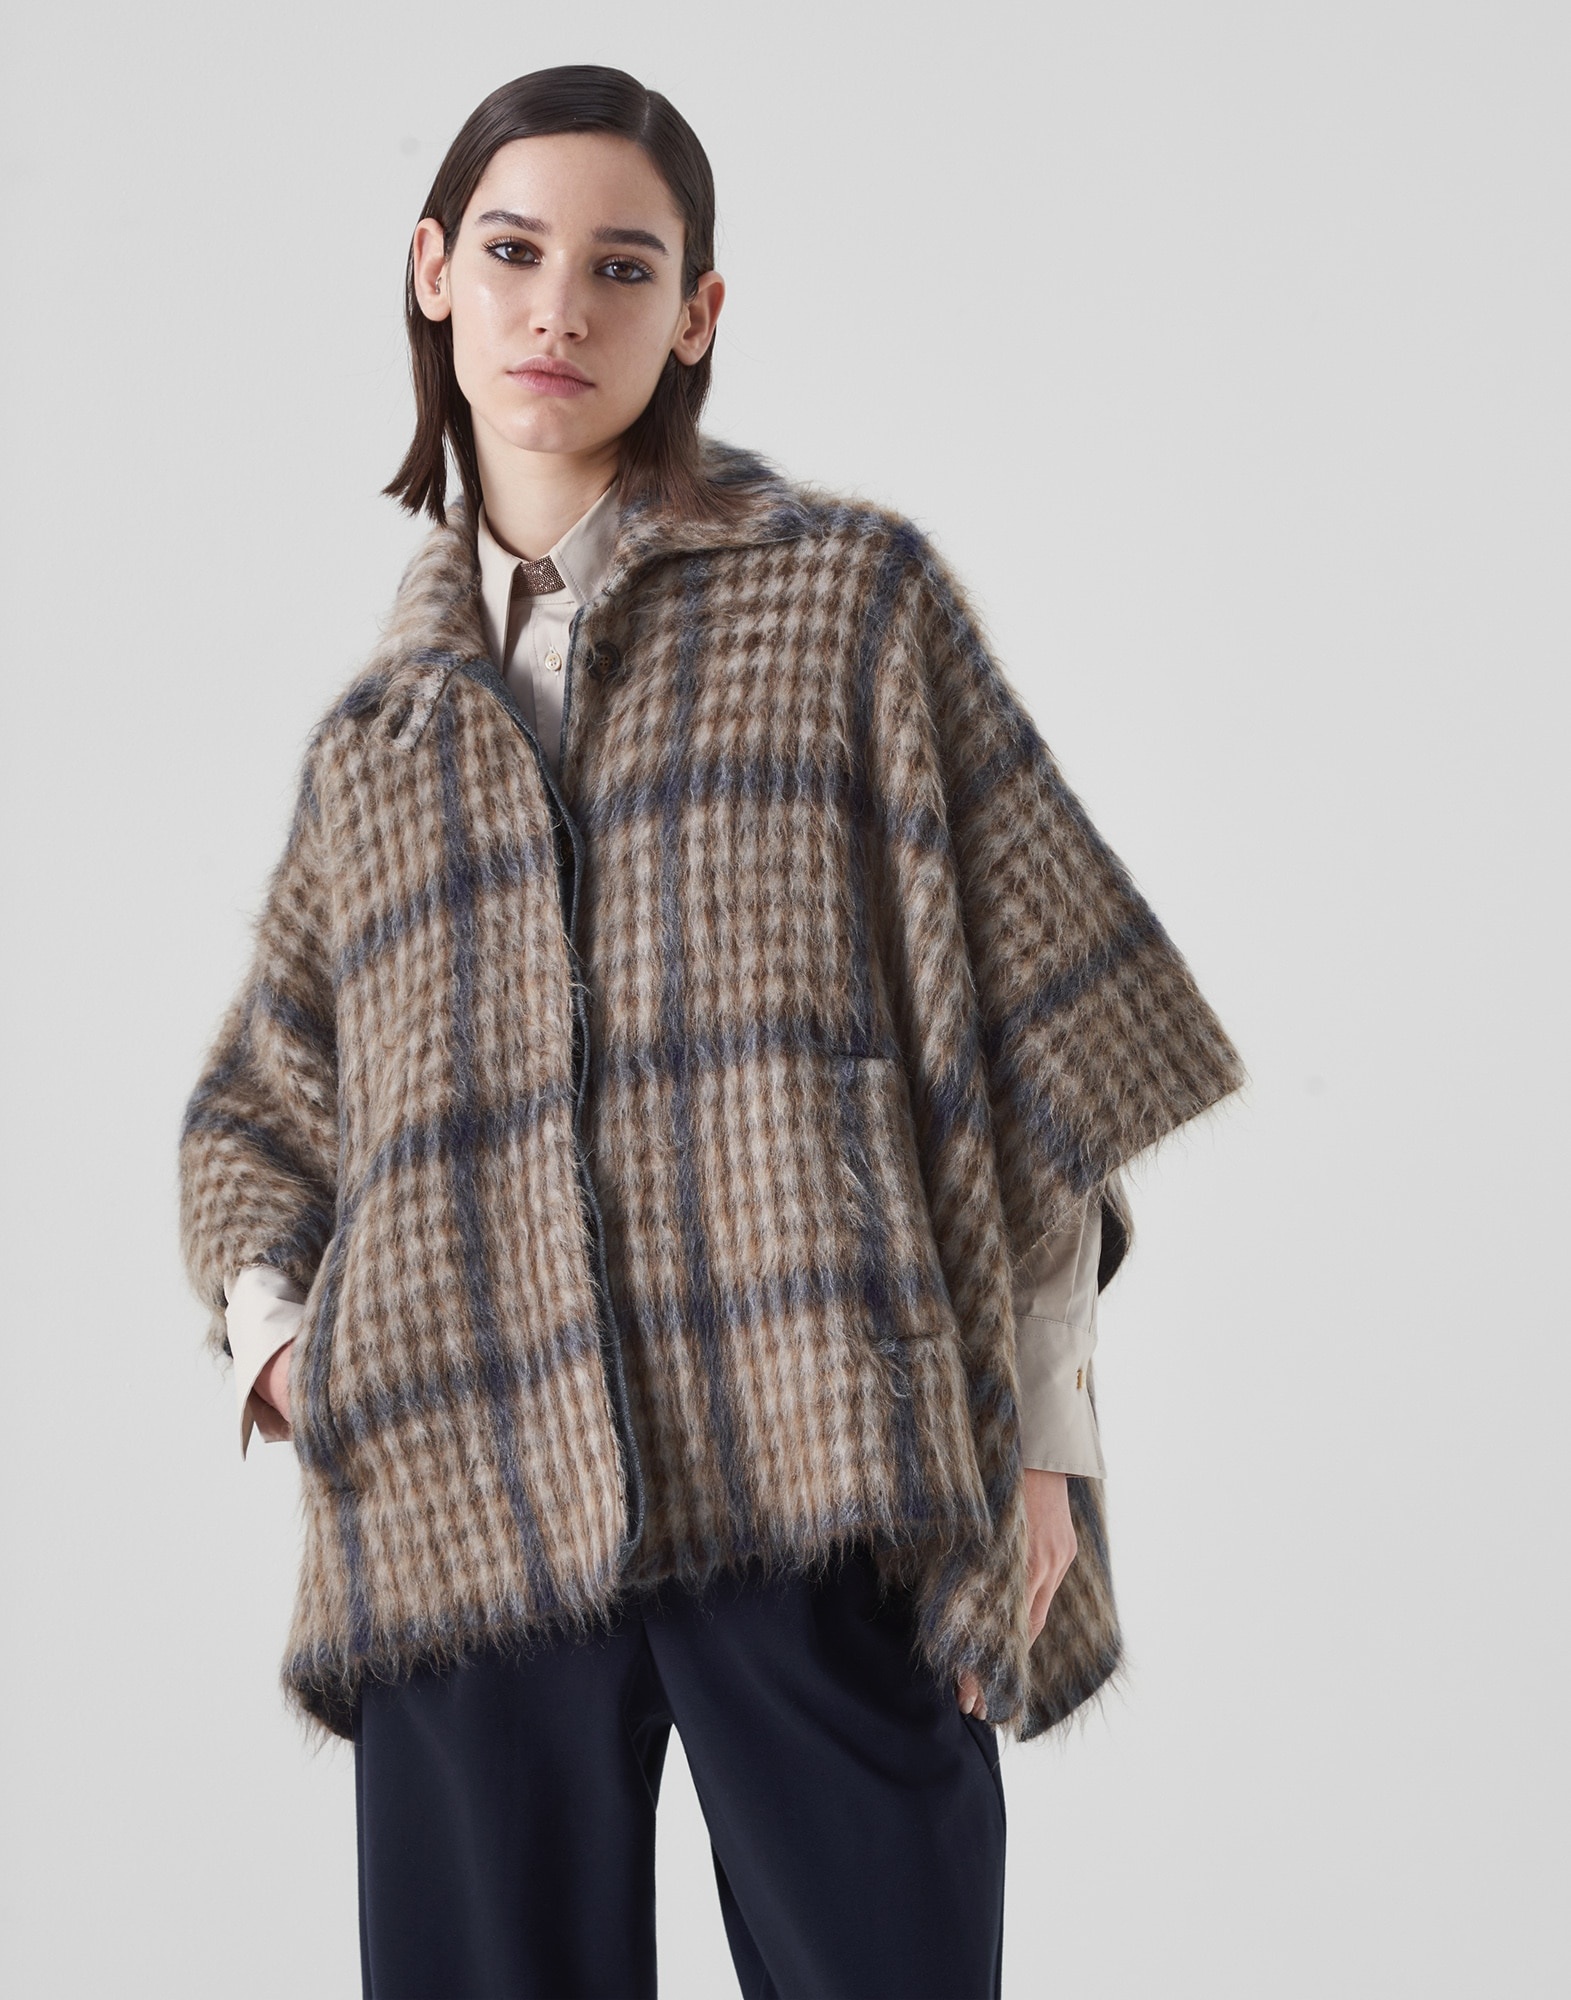 Tartan intarsia double knit cape in virgin wool, mohair and cashmere - 1